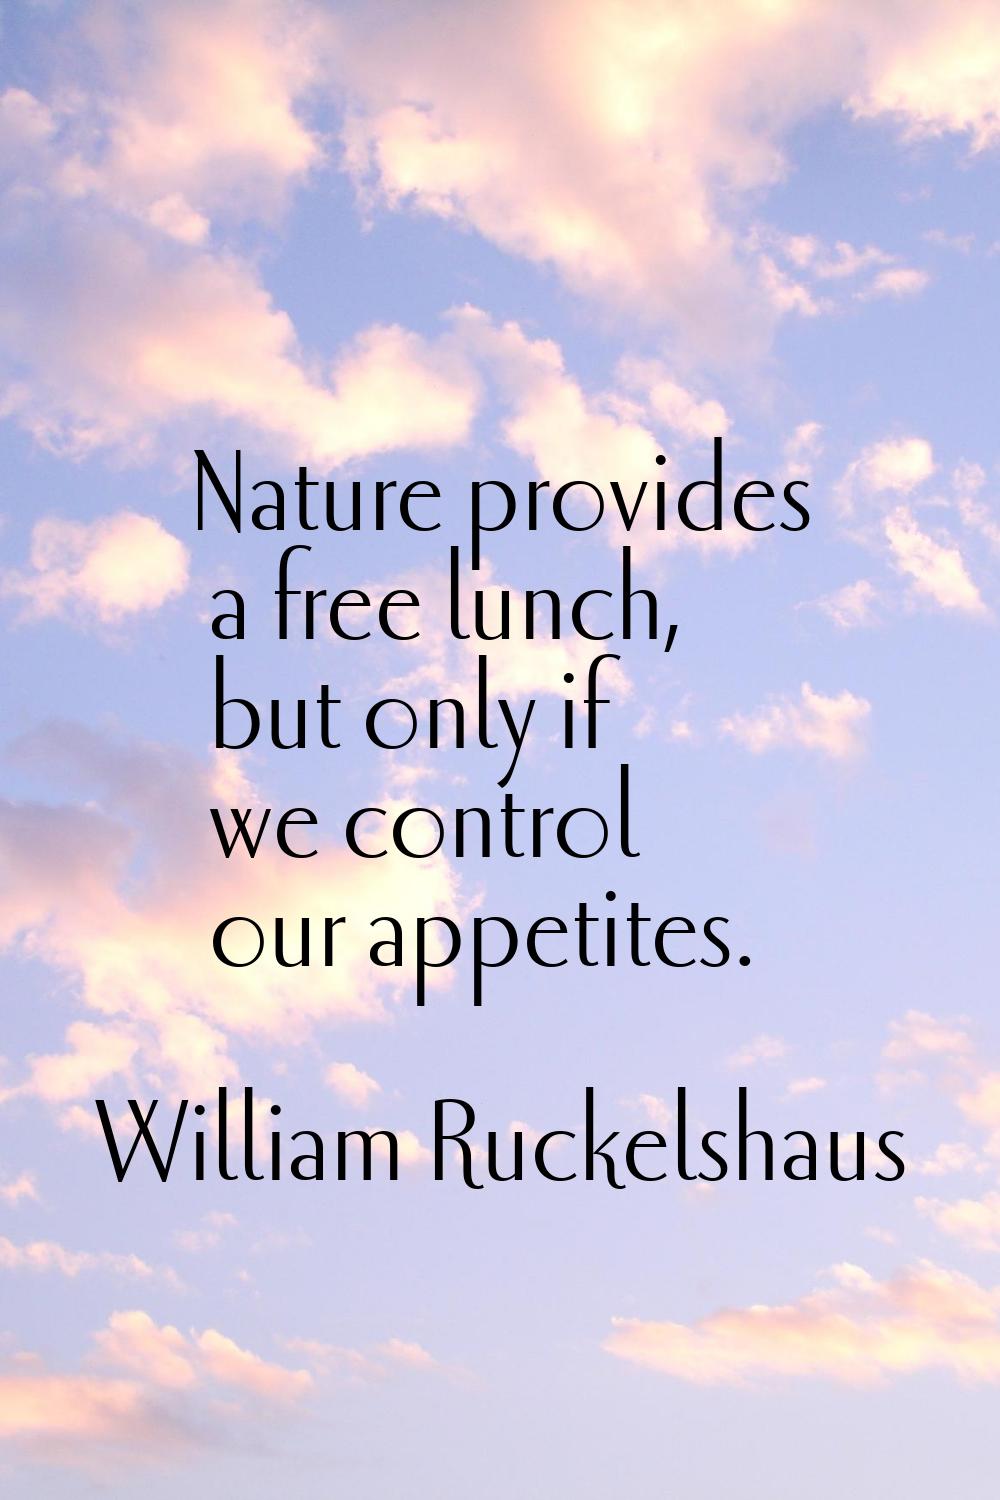 Nature provides a free lunch, but only if we control our appetites.